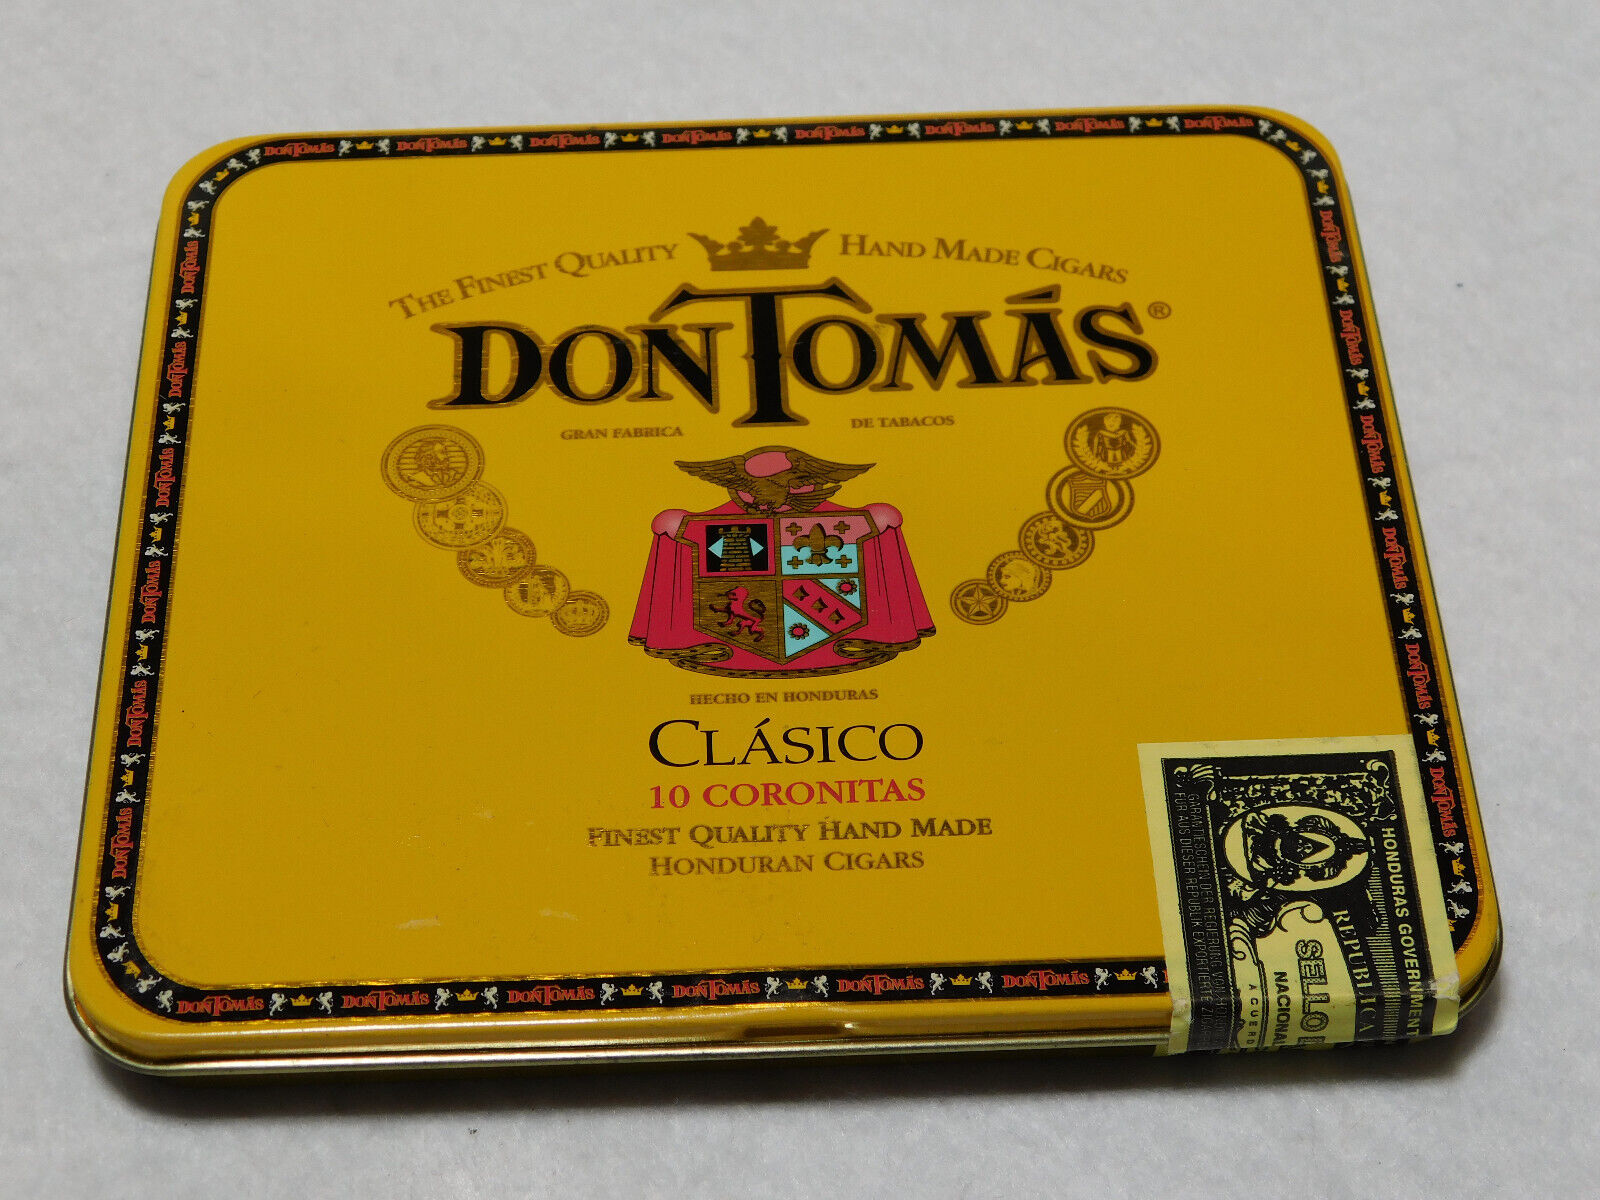 Vintage Don Tomas 5in. X 4.5in. Cigar Tin in Very Good Condition.